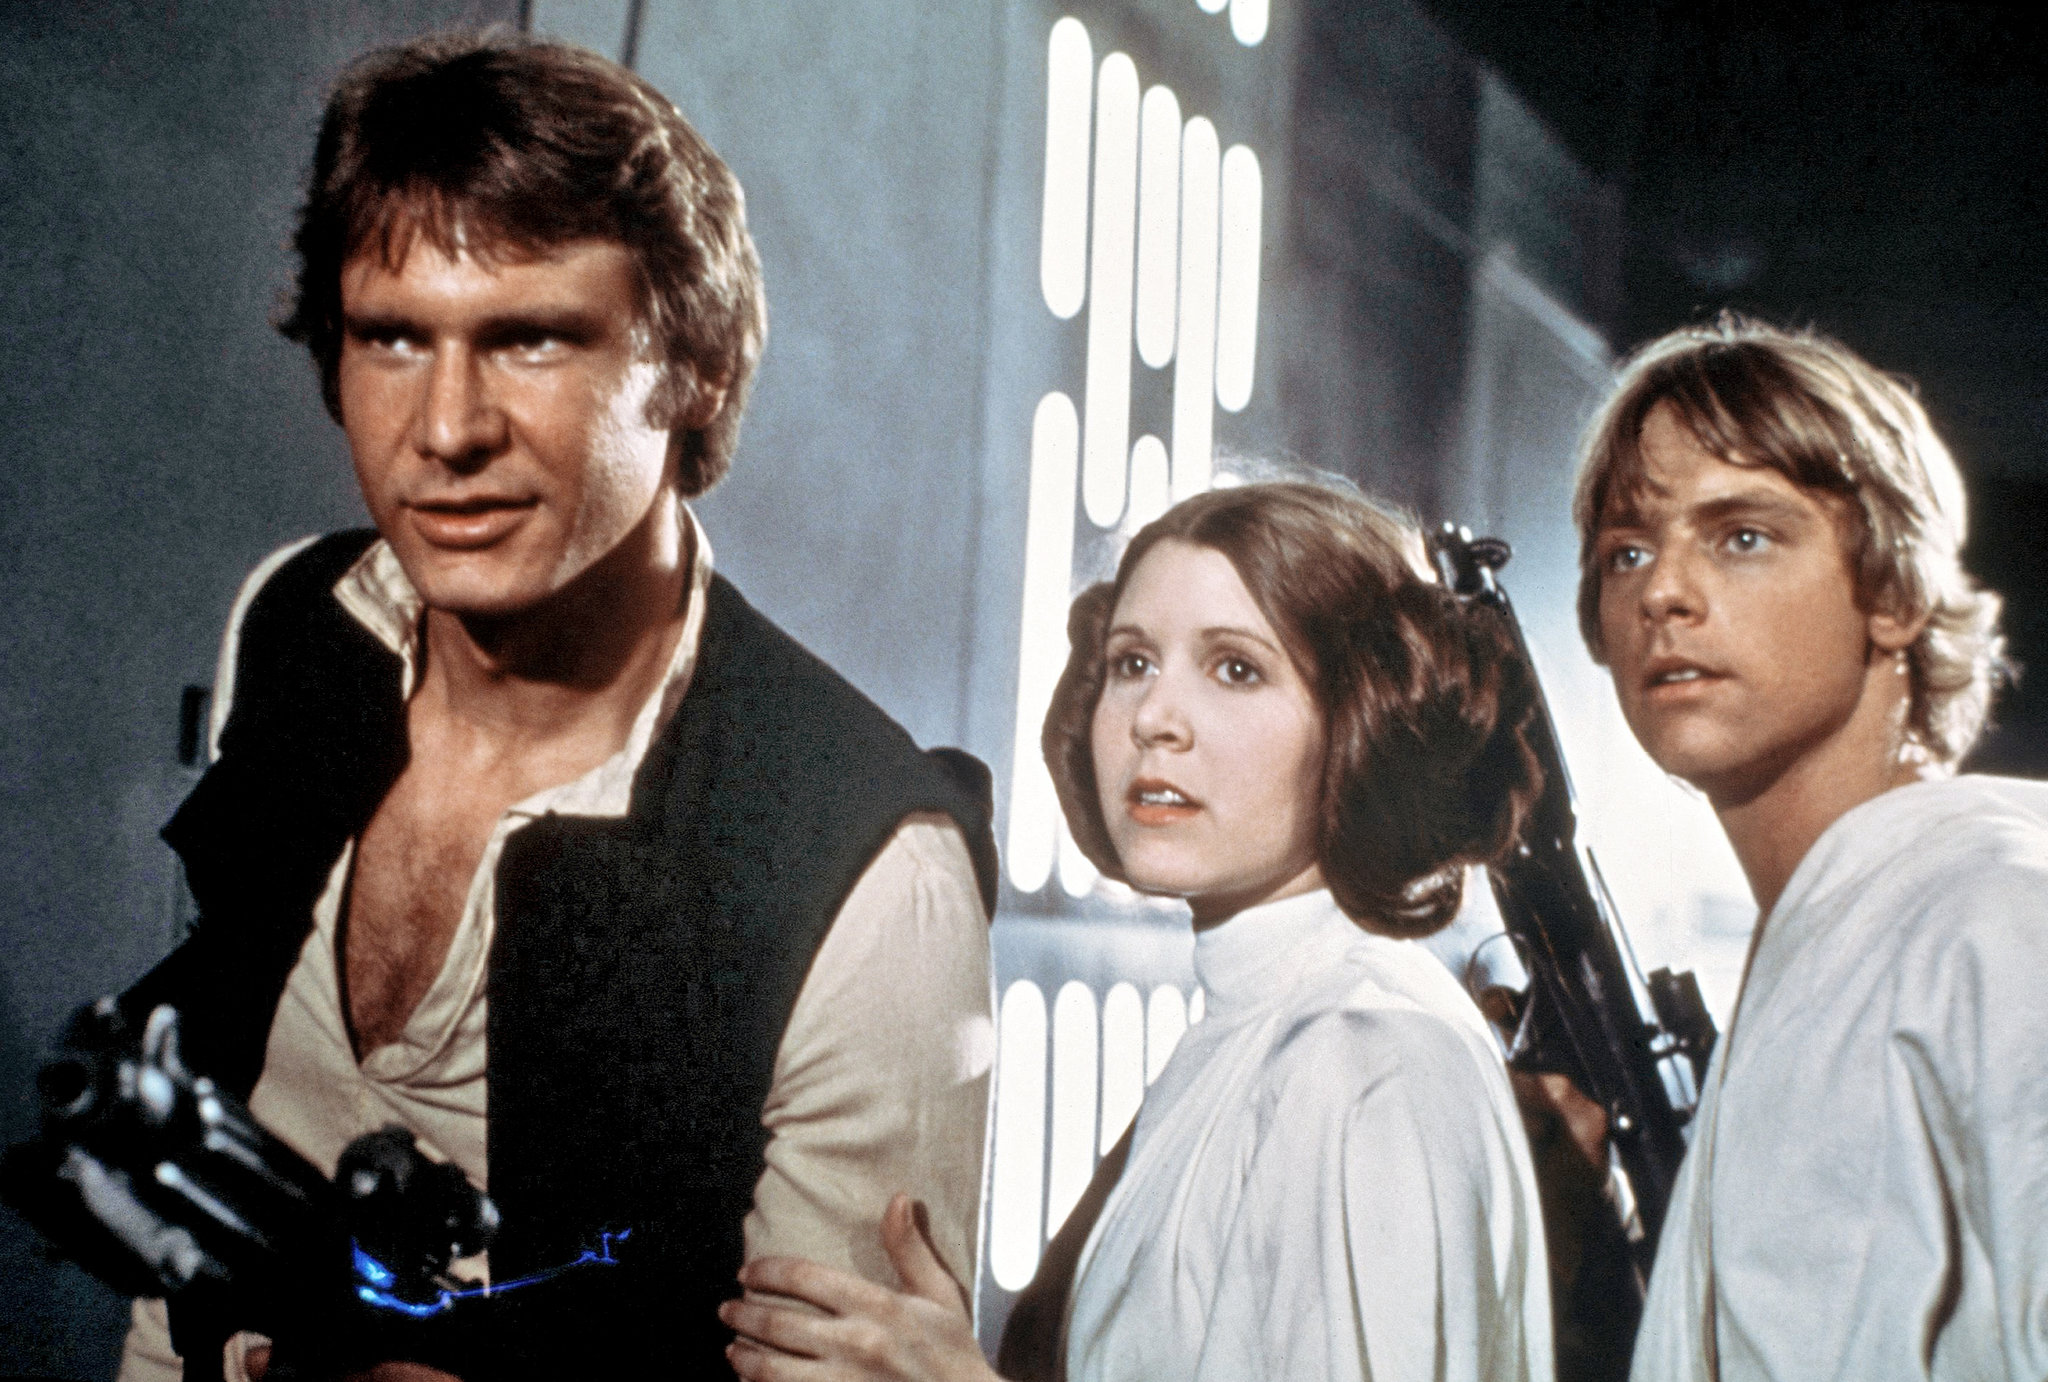 How 'Star Wars' Defined My Generation - The New York Times